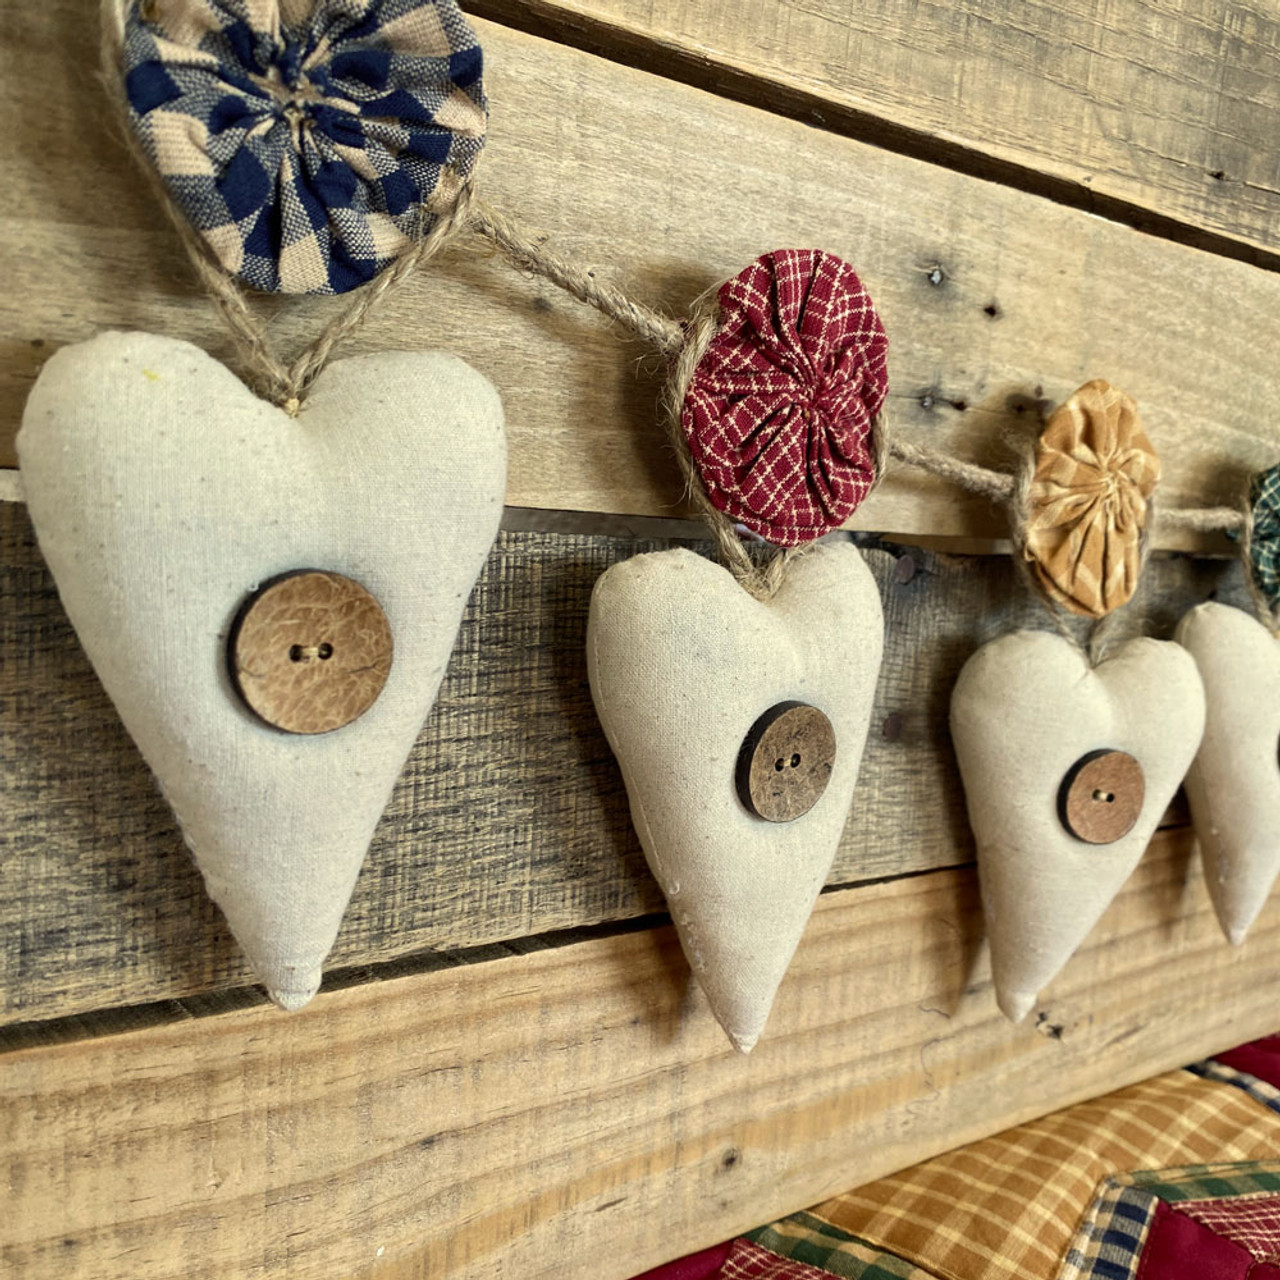 Natural White Fabric Rustic Heart Christmas Ornaments - Set of 5 -  by Marilee Home